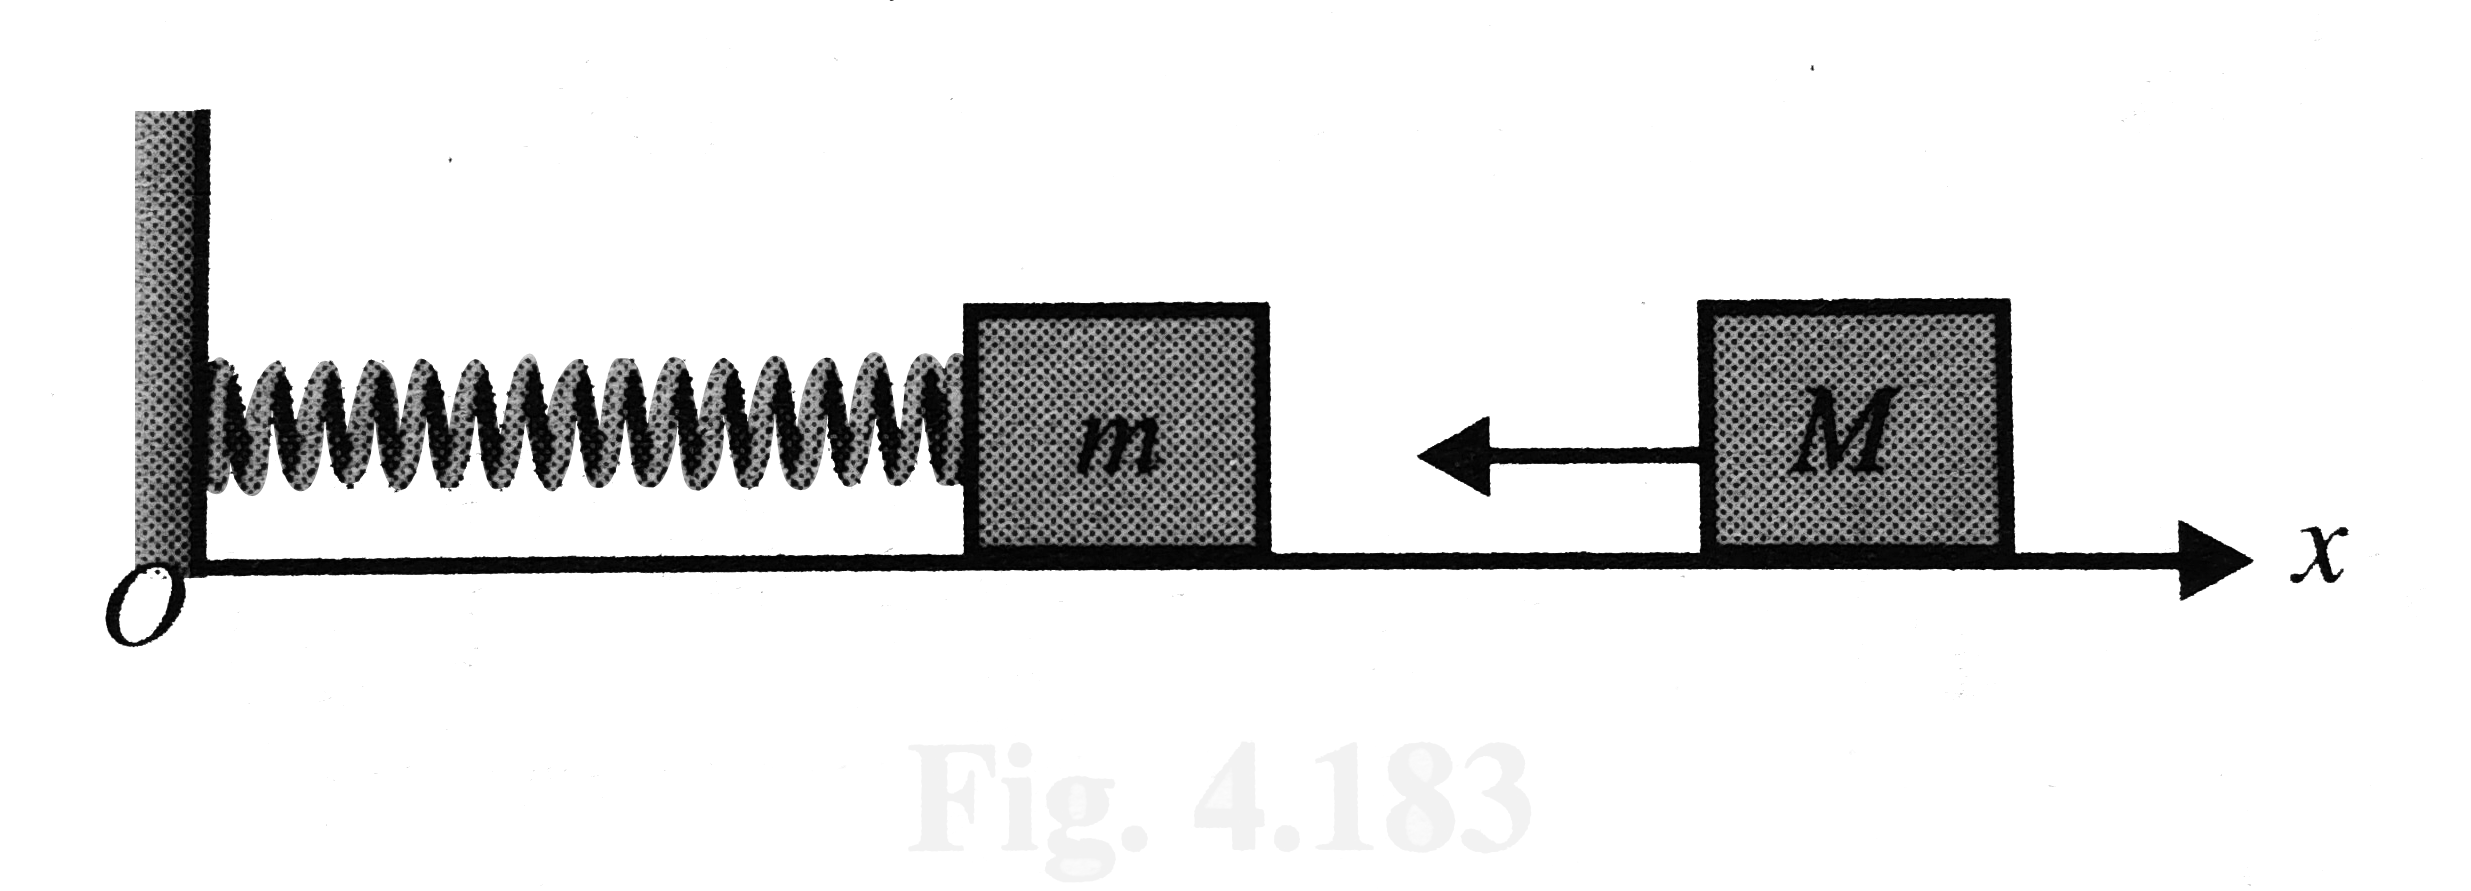 One end of an ideal spring in fixed in a wall at origin O and axis of spring is paralllel to the x-axis . A block of mass m = 1 kg is attached to the free end of the spring and it is performing SHm. Equation of position of the block in coordinate system Shown in Fig. is x=10+3sin(10t), where t is in second and x in cm. Another block of mass M=3kg moving towards the origin with velocity 30(cm)/(s) collides with the block performing SHM at t=0 and gets stuck to it.   Q. Angular frequency of oscillation after collision is